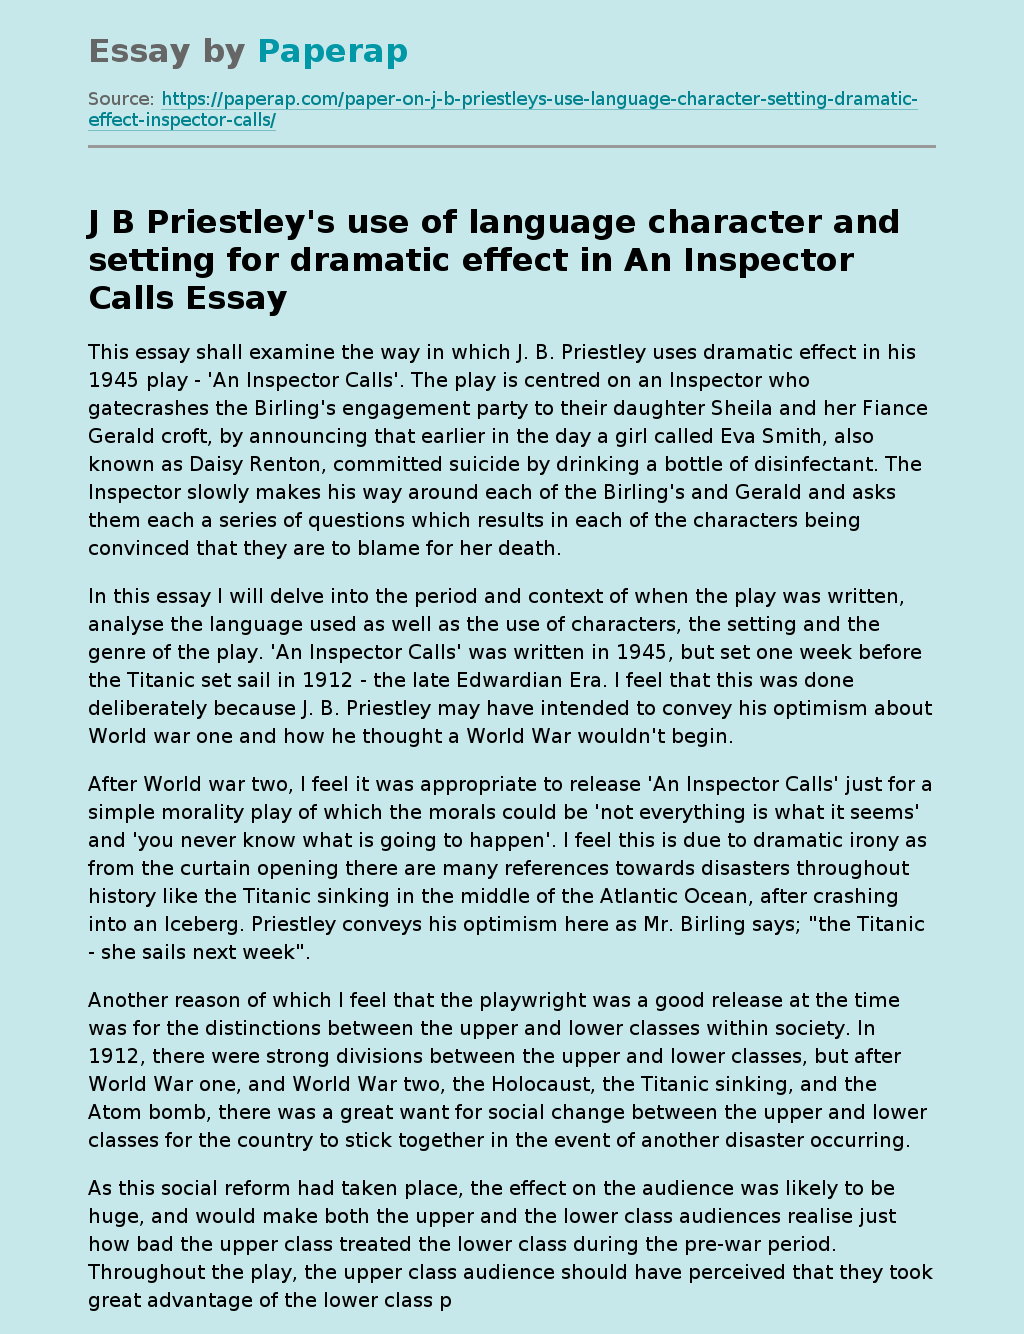 Priestley's Language, Character & Setting in An Inspector Calls